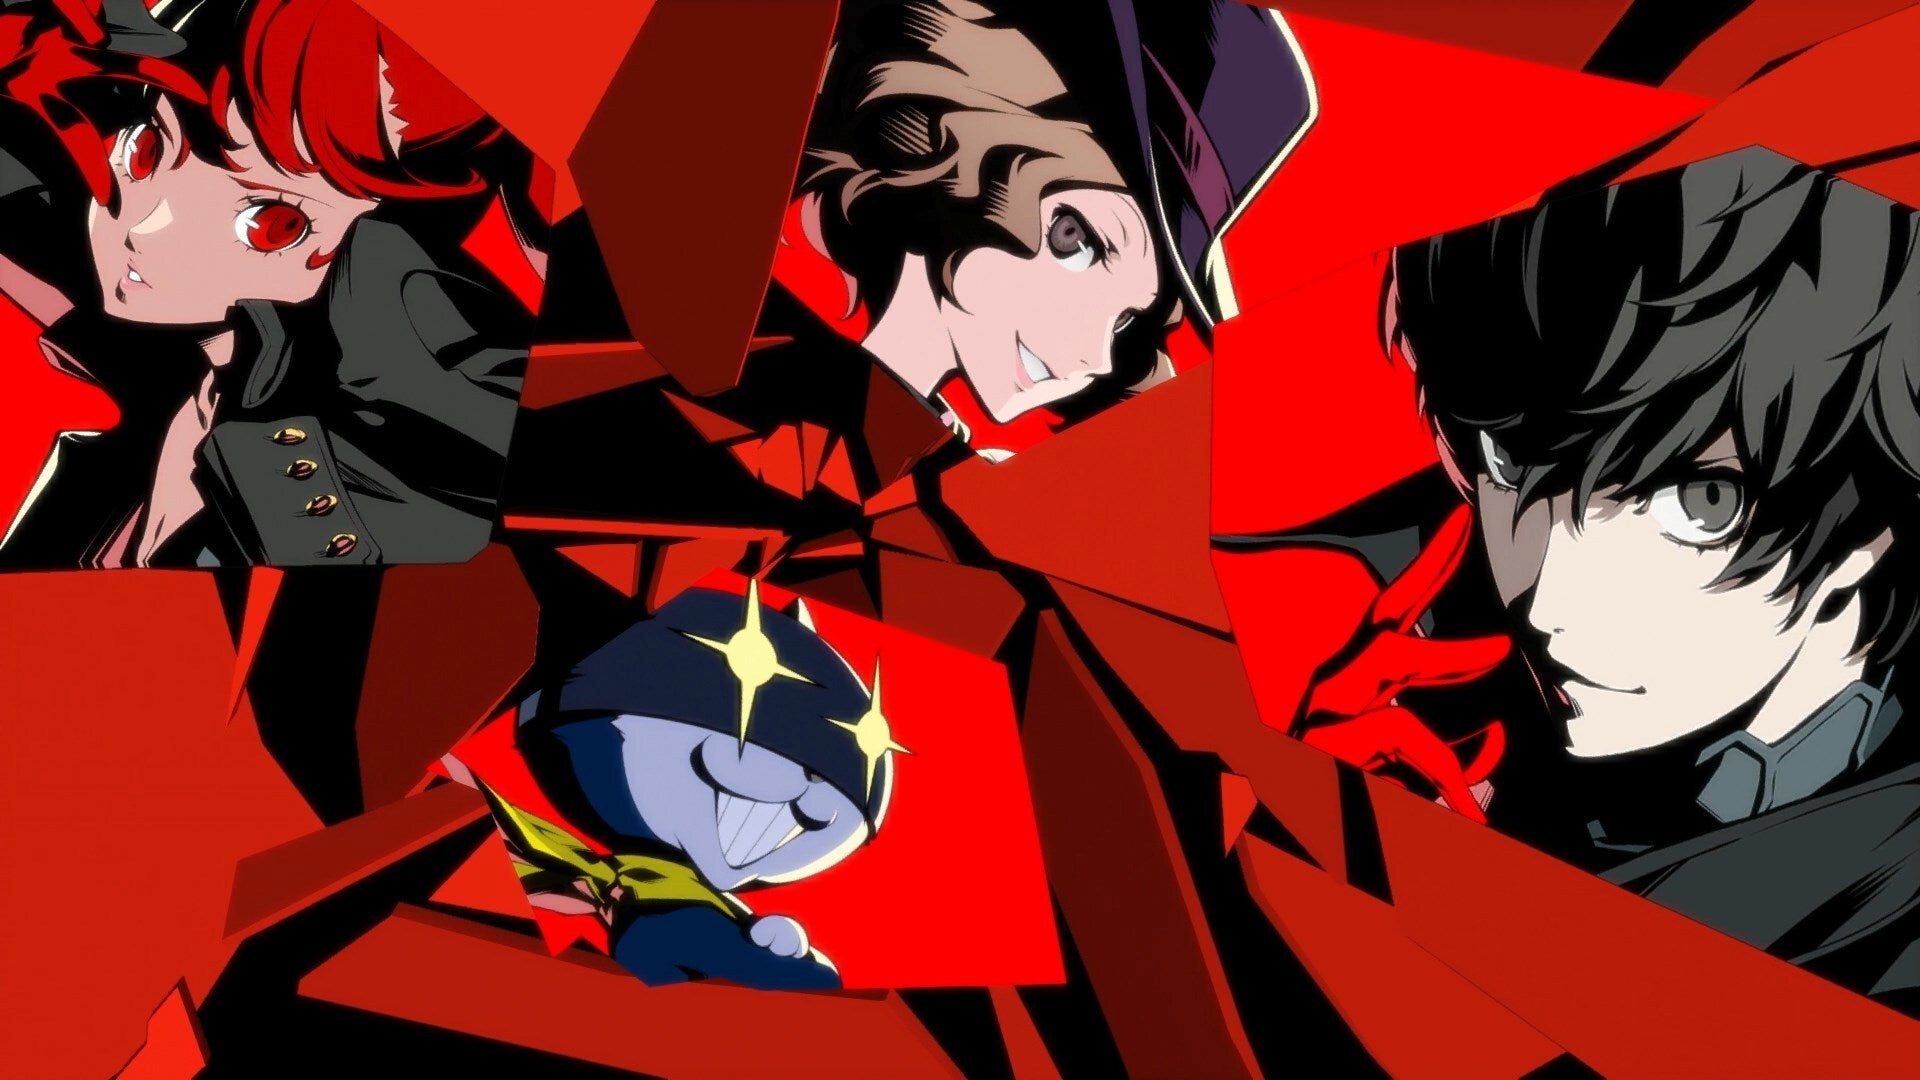 Image for Persona 5 Royal coming to Switch this October - with Persona 3 and 4 to follow